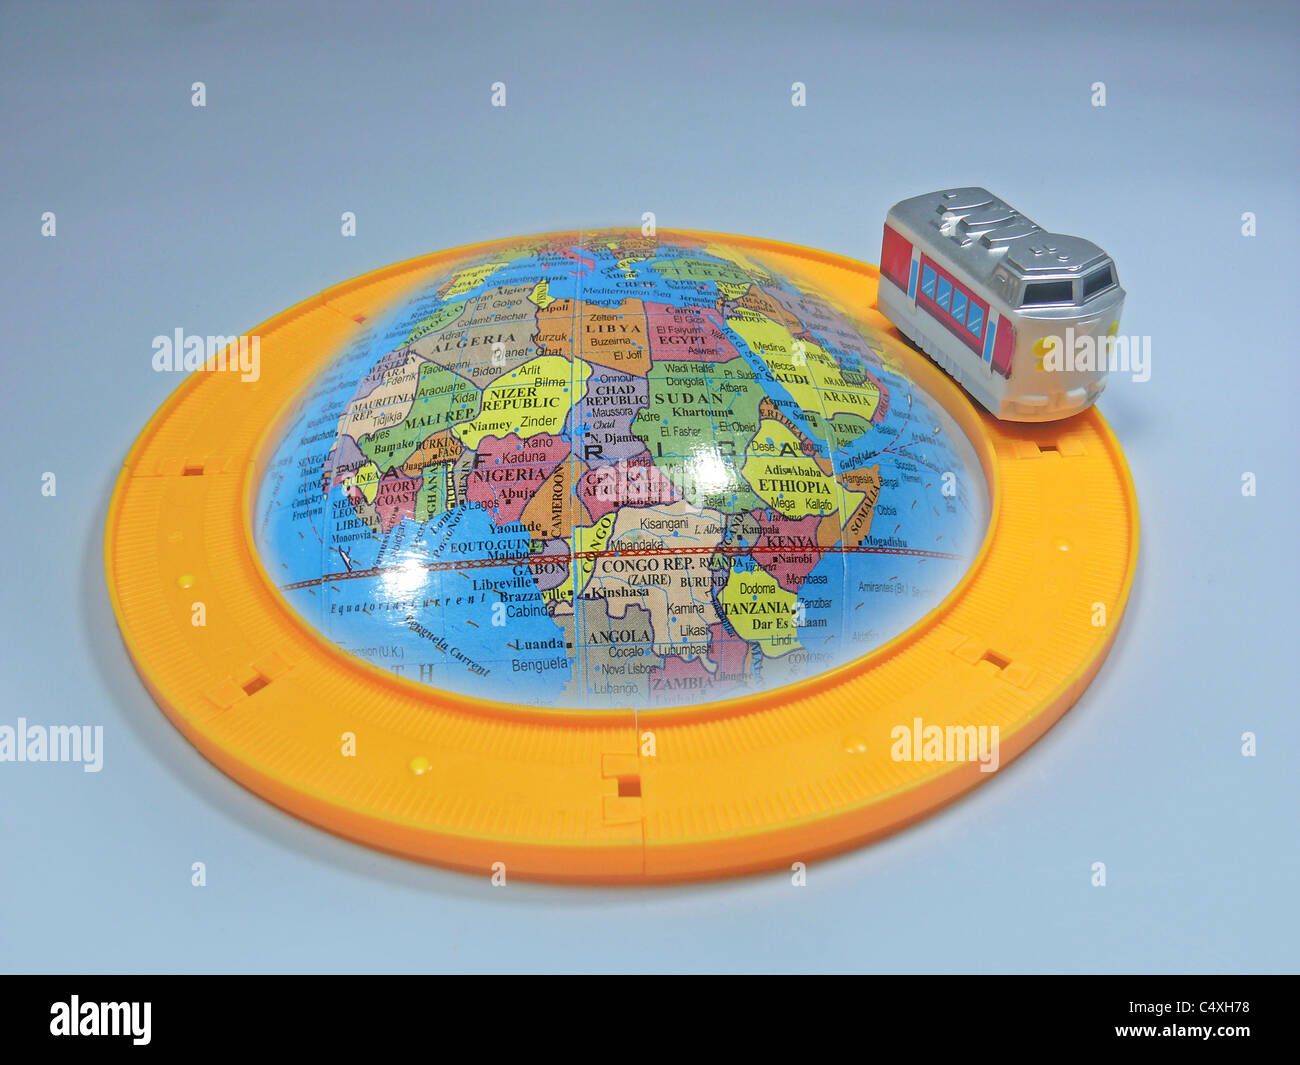 Toy train around model of planet Earth, Concept Stock Photo